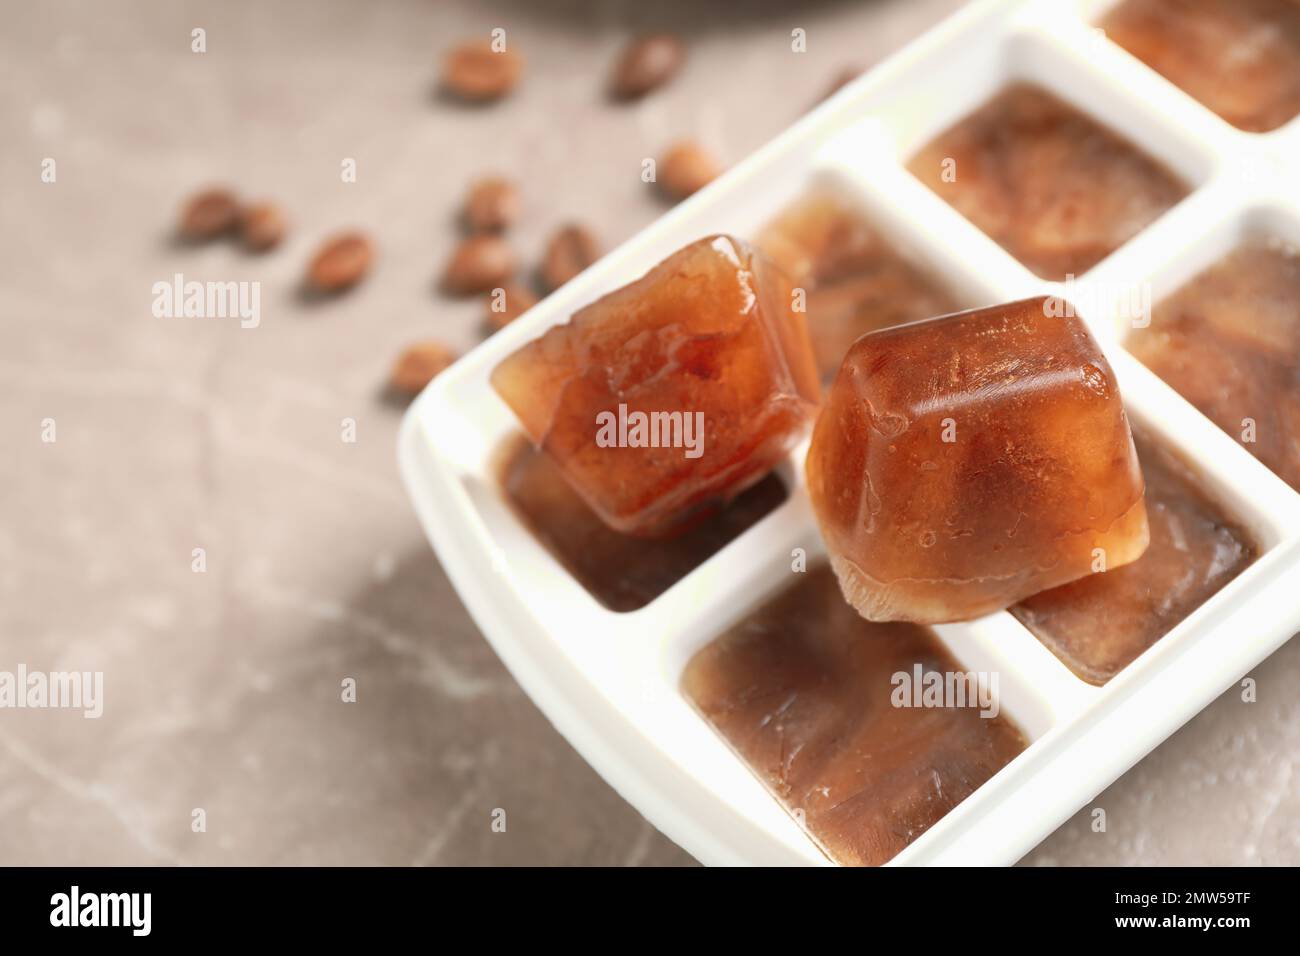 Ice cubes made with coffee in blue ice cube tray to prepare refreshing  coffee drinks like iced coffee. White background, view from above, isolated  Stock Photo - Alamy